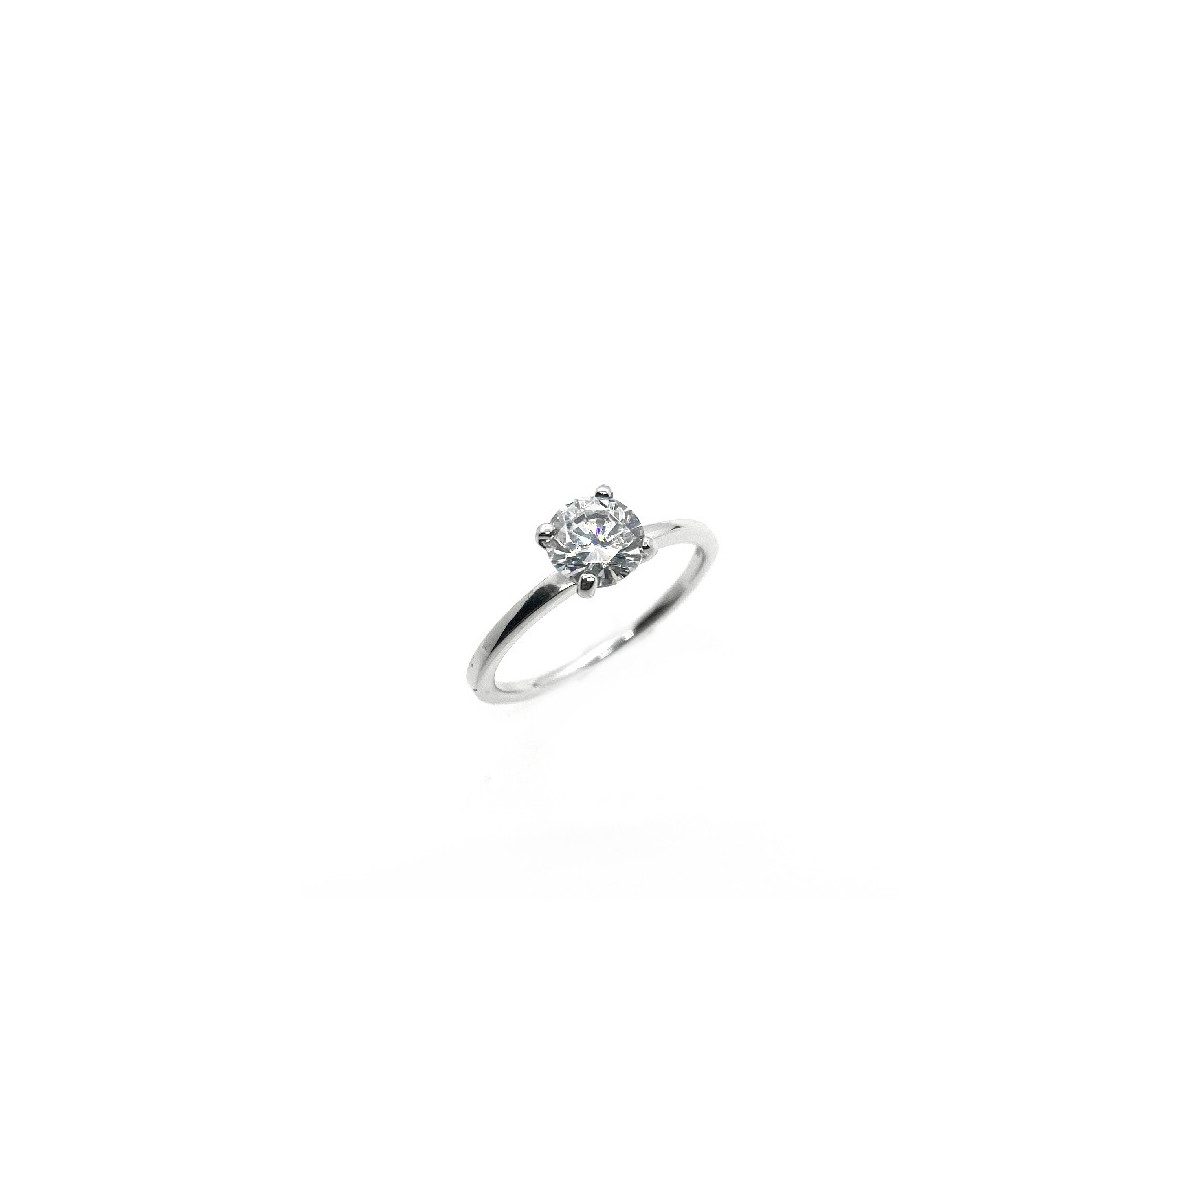 LINEARGENT SOLITAIRE RING - 12173-R